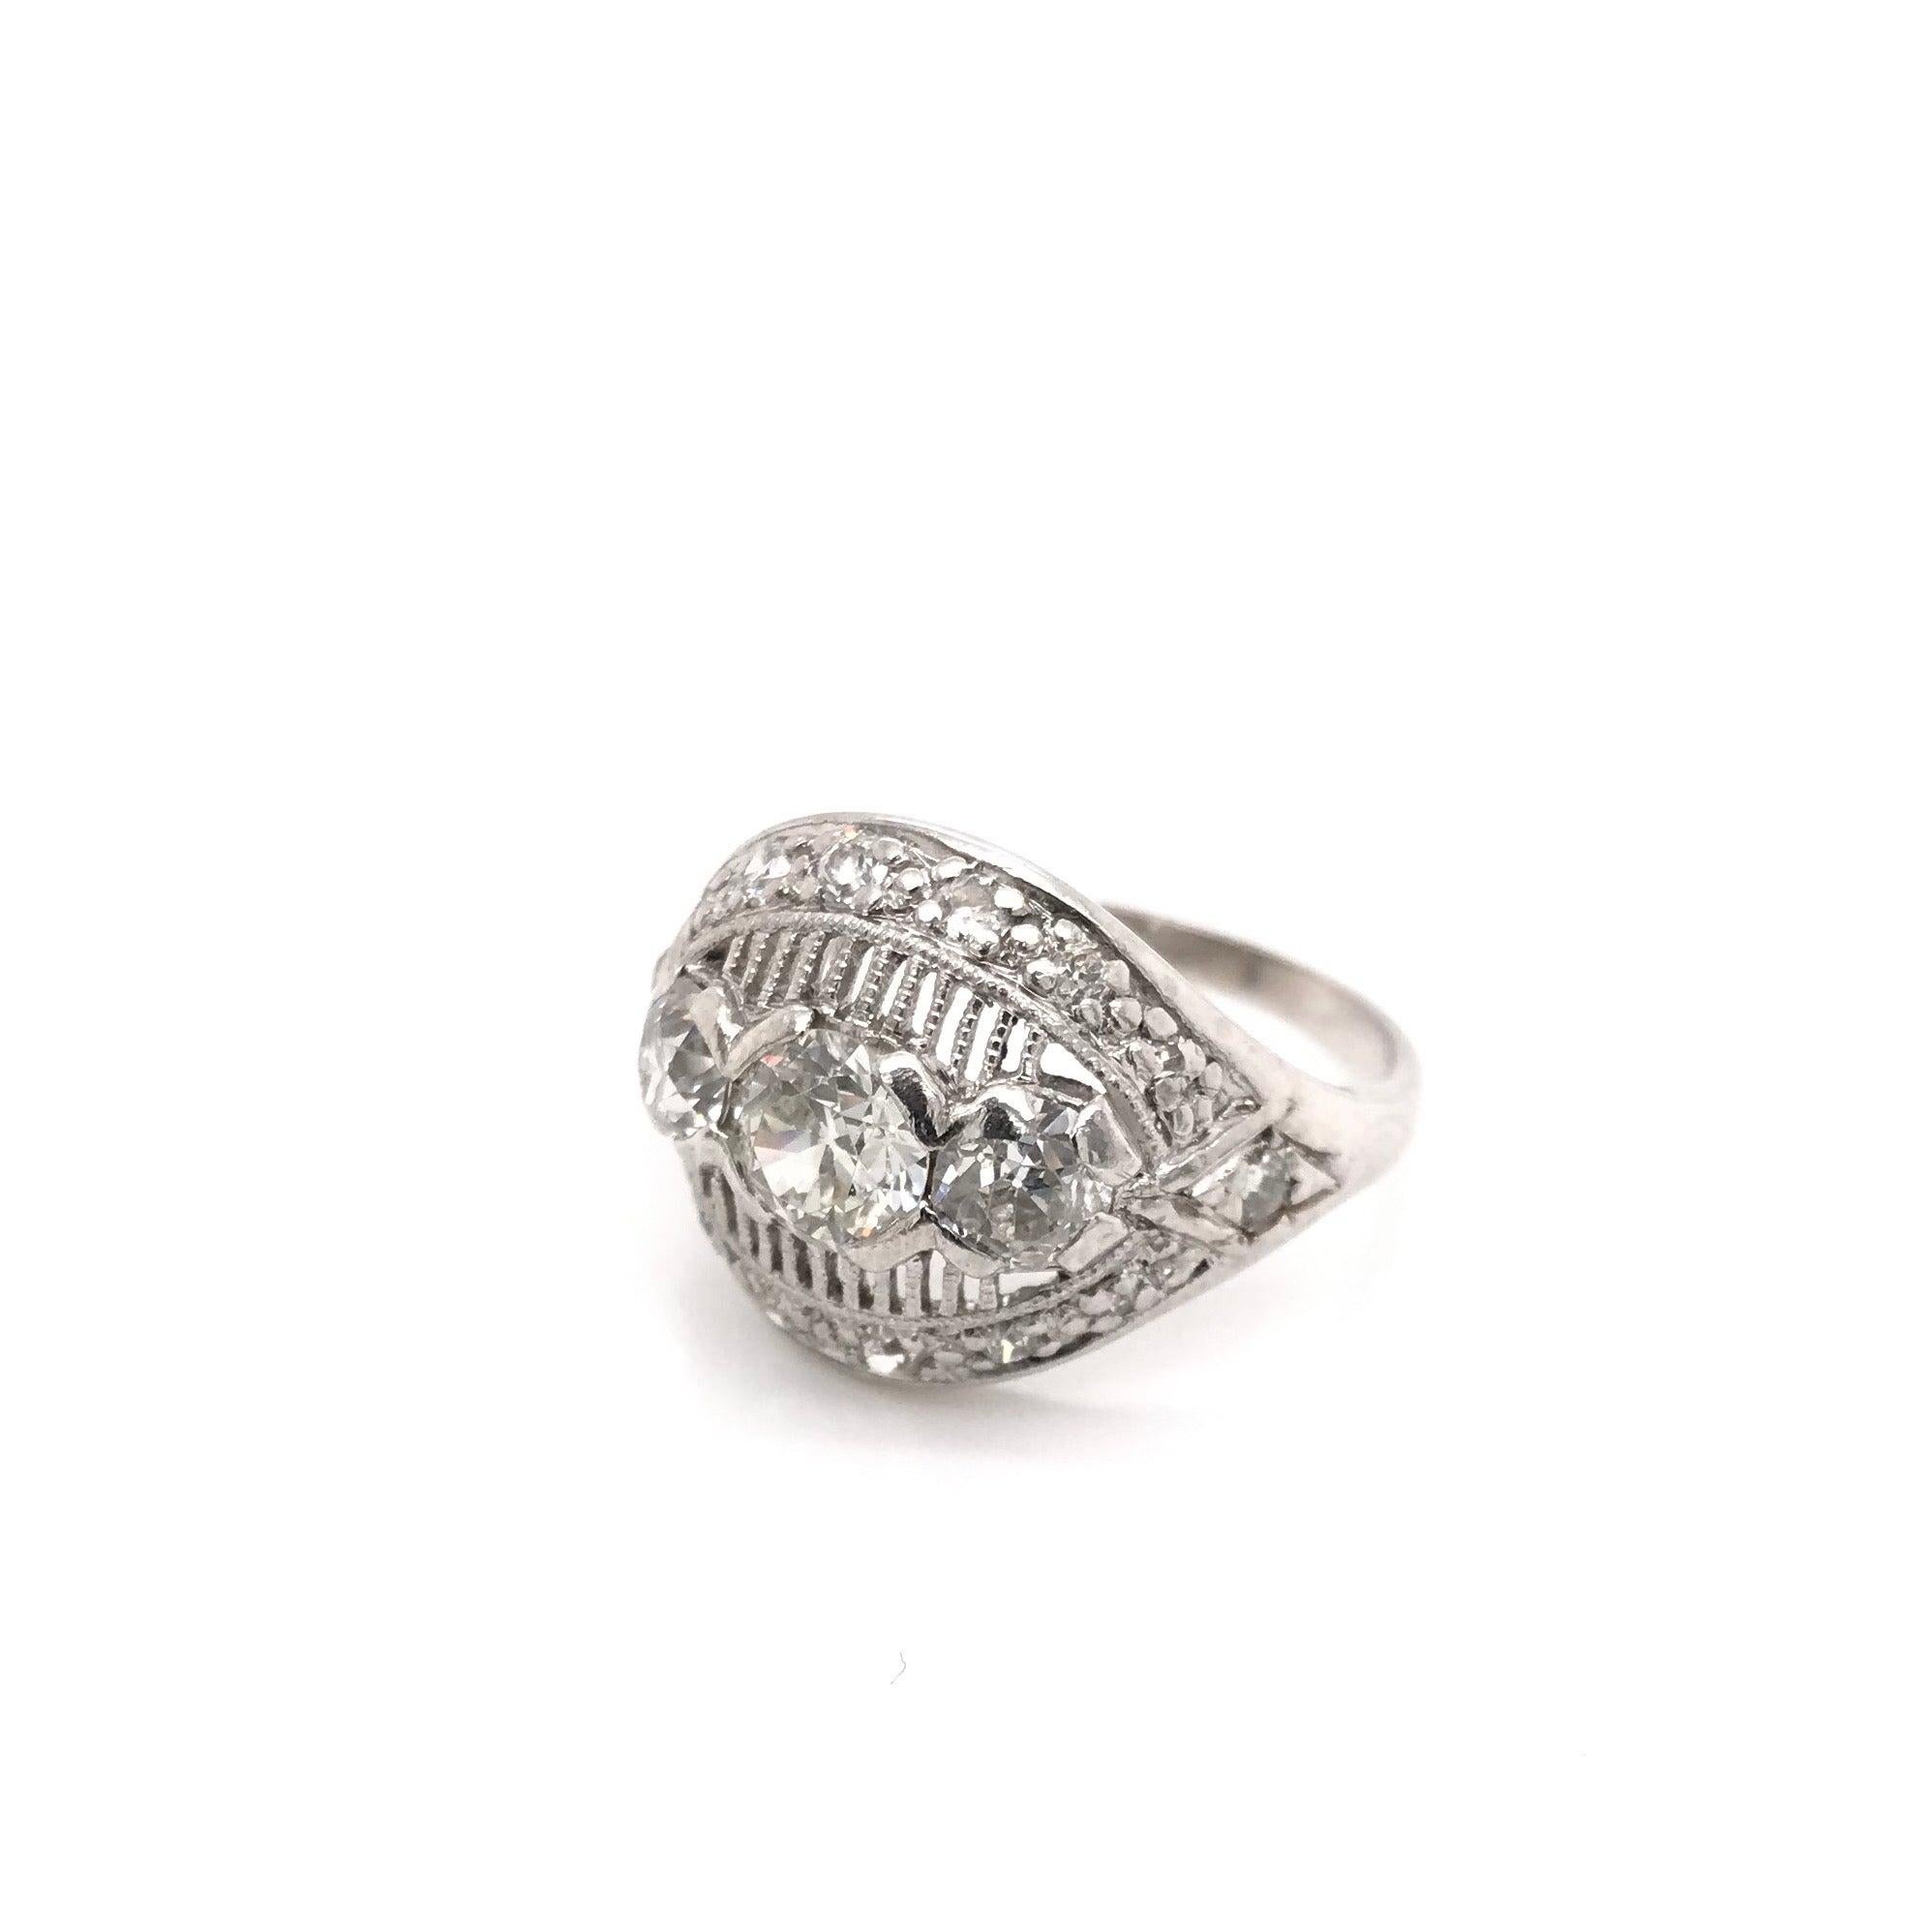 This vintage diamond ring was crafted sometime during the Mid Century design period ( 1940-1960 ). The piece features a 0.53 carat diamond in the center that grades approximately J in color, VS1 in clarity. The platinum setting features 17 diamonds